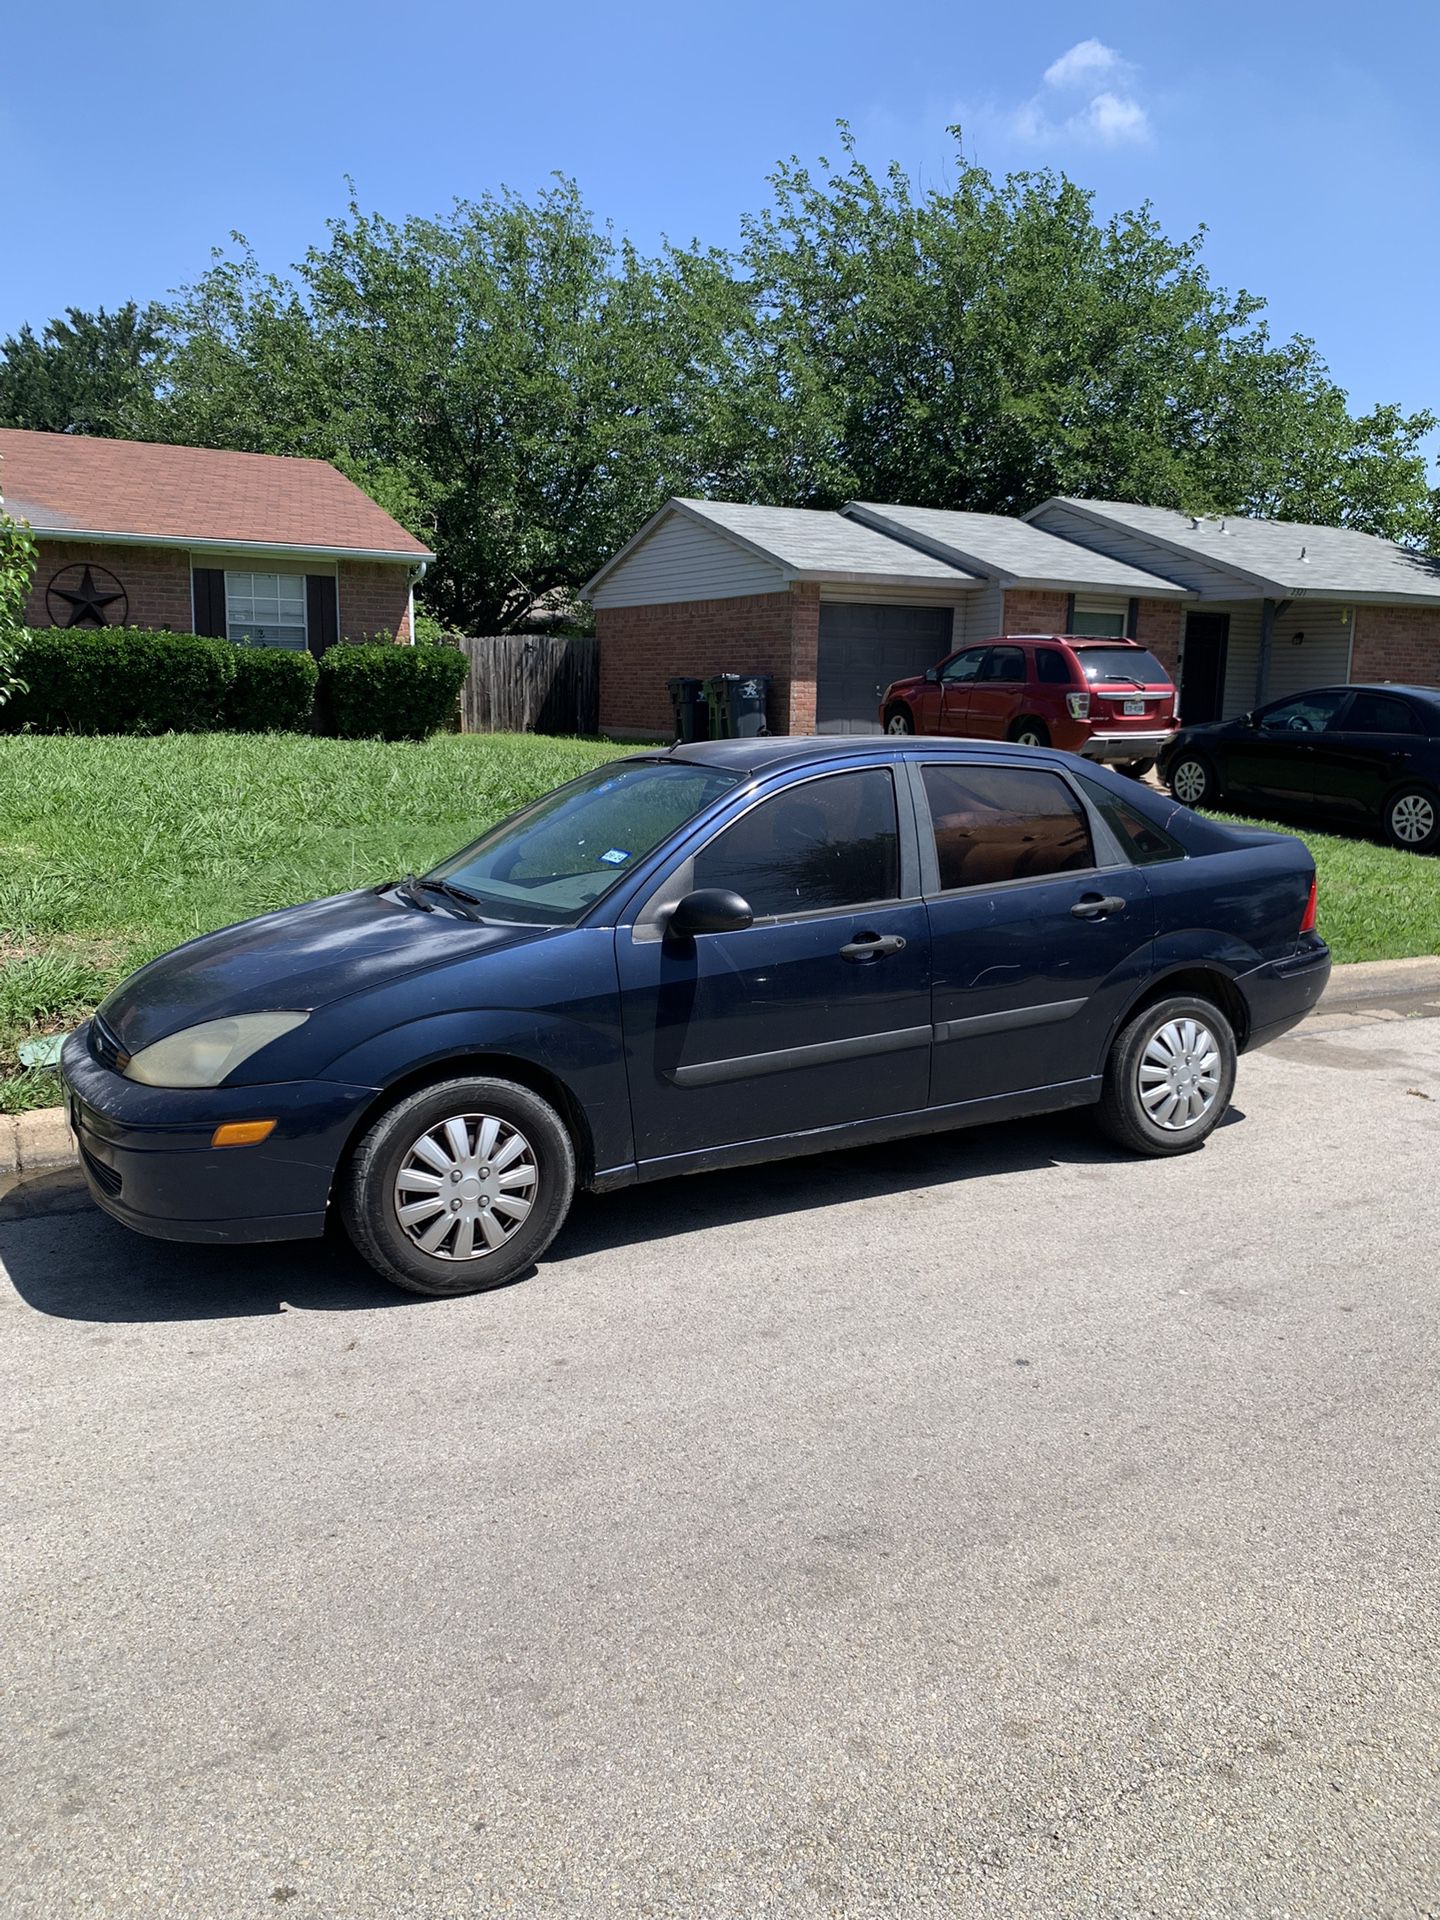 Ford Focus  2004 Good Condition New Tires 